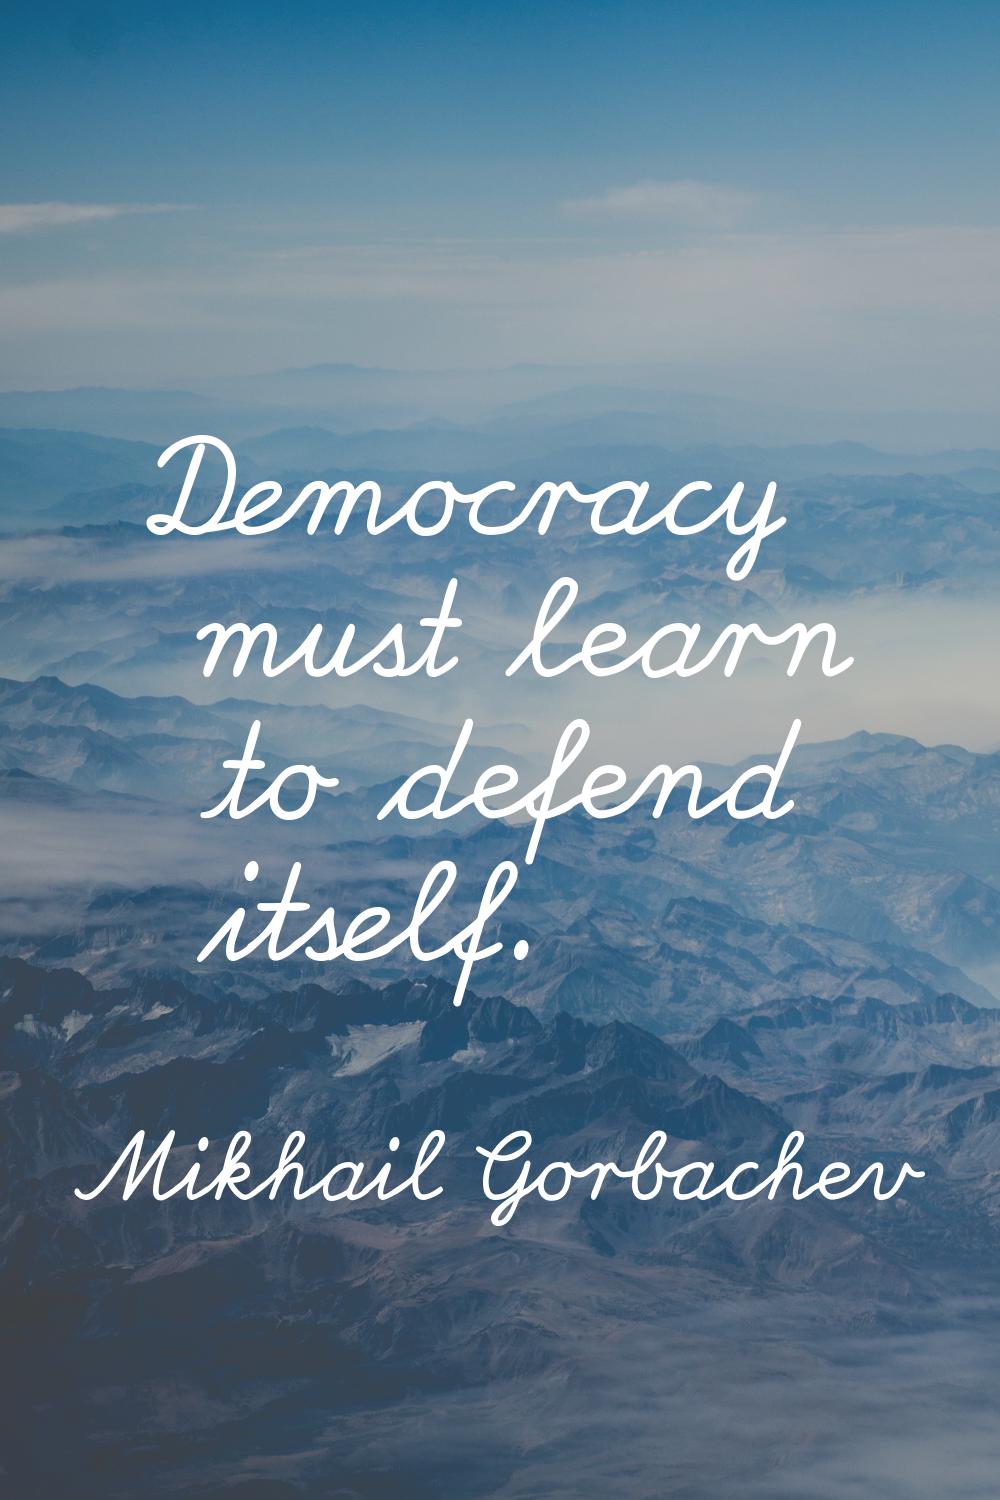 Democracy must learn to defend itself.